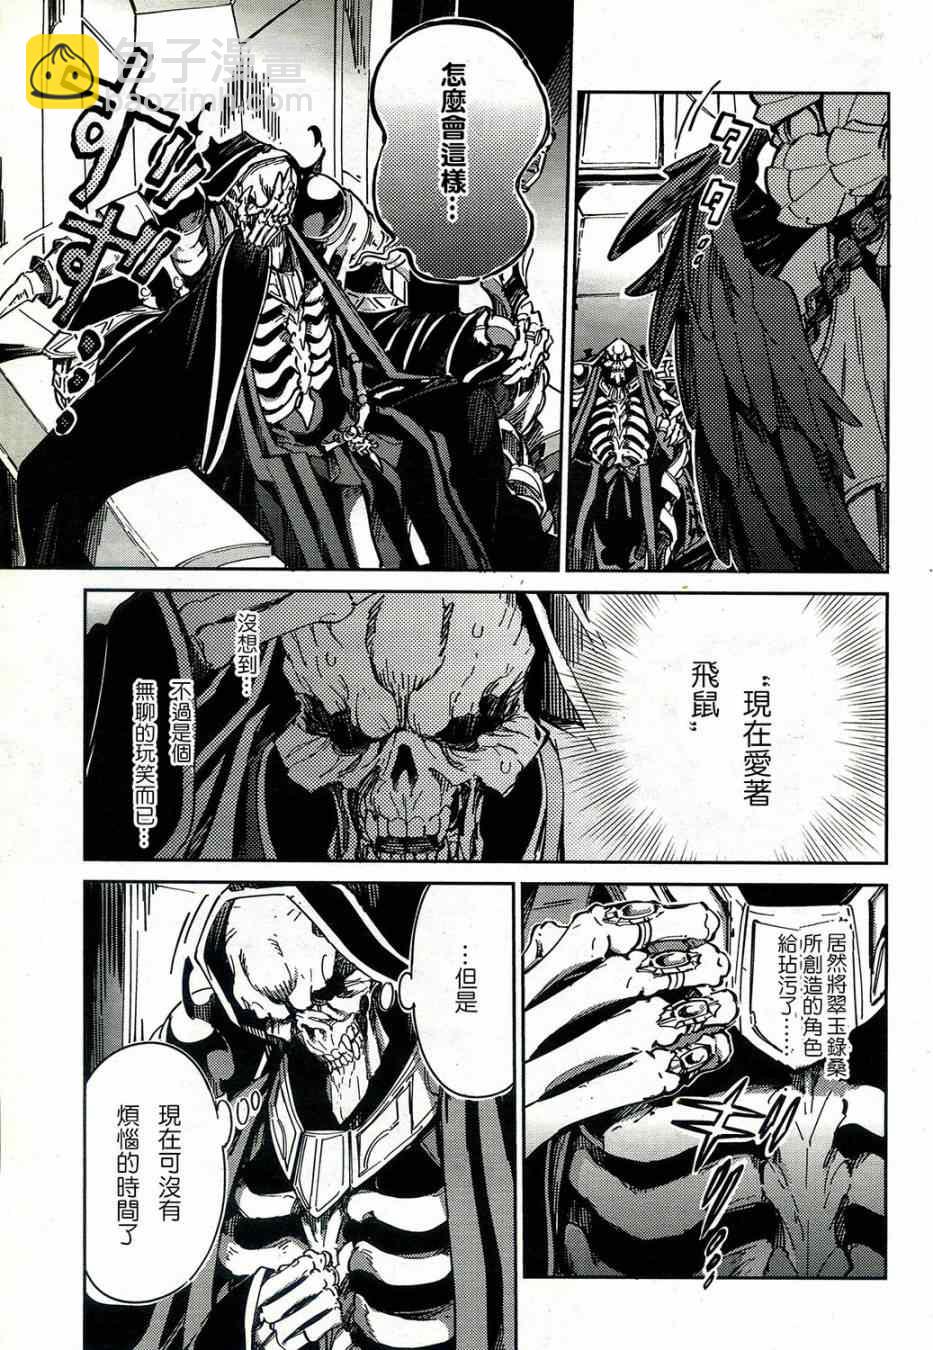 OVERLORD - 第1話 - 2